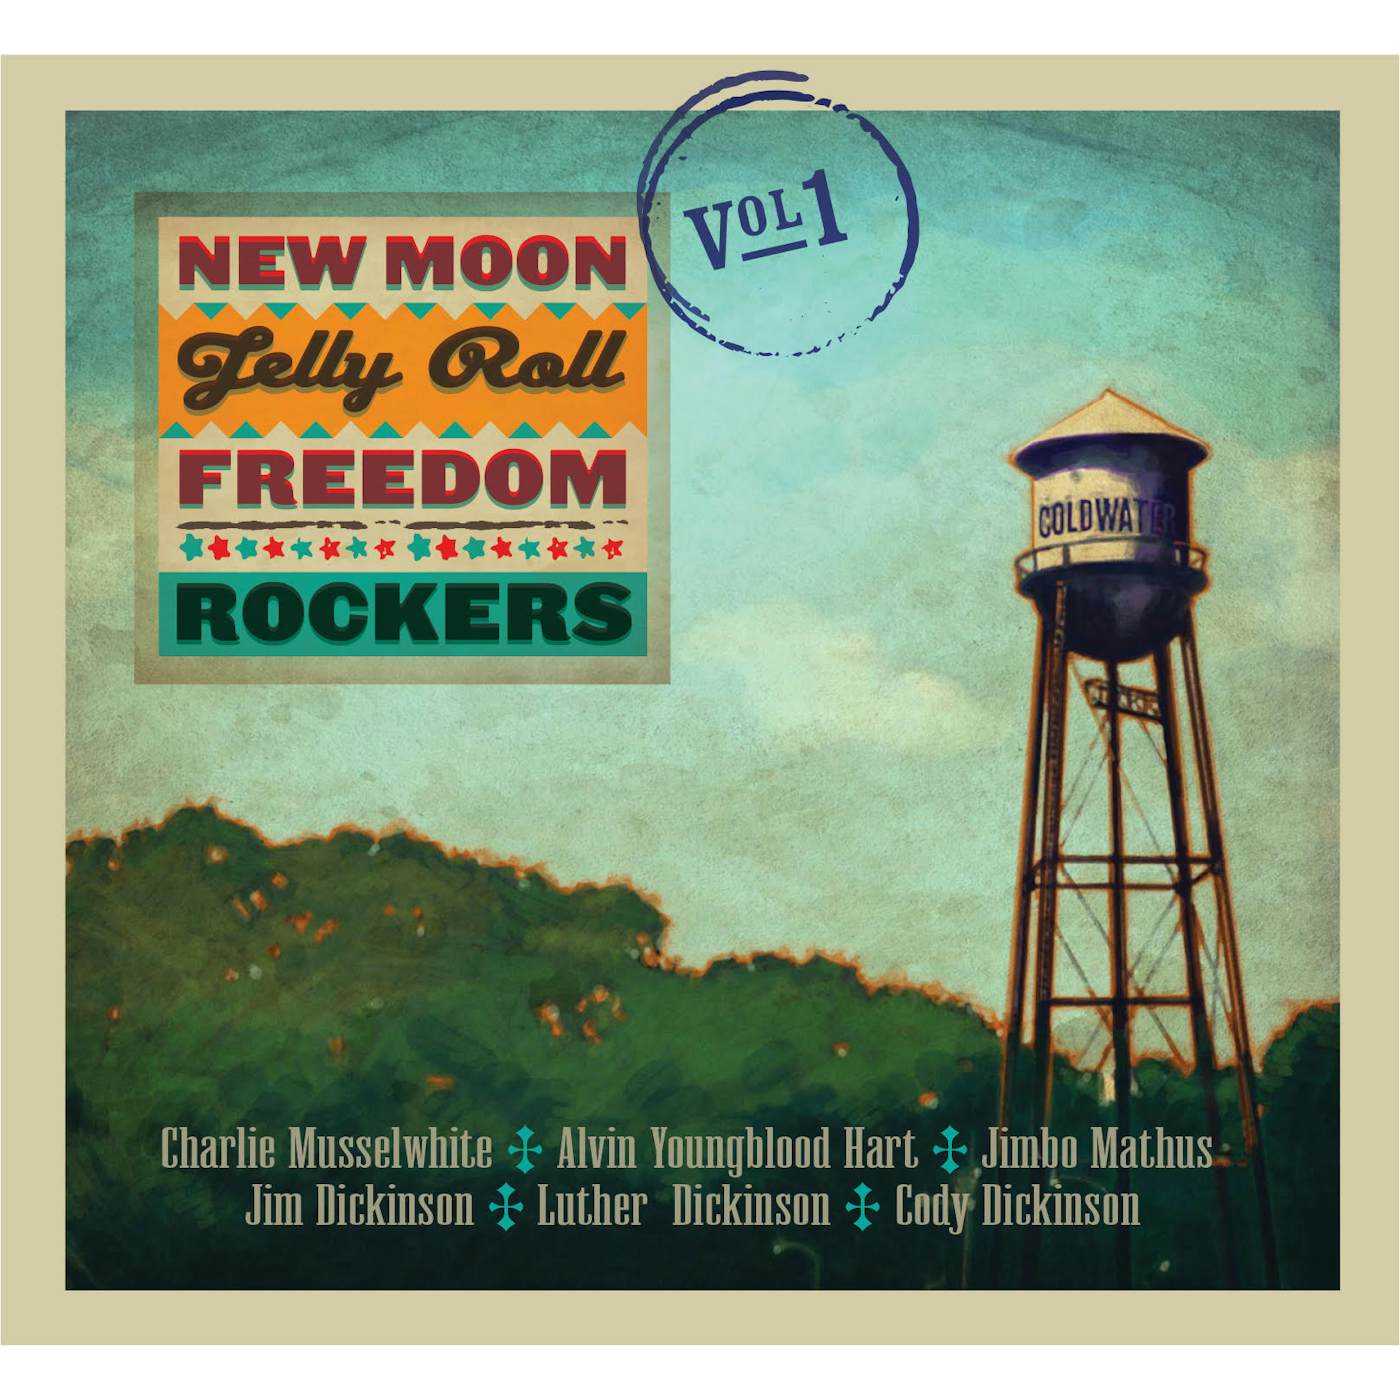 New Moon Jelly Roll Freedom Rockers VOLUME 1 CD